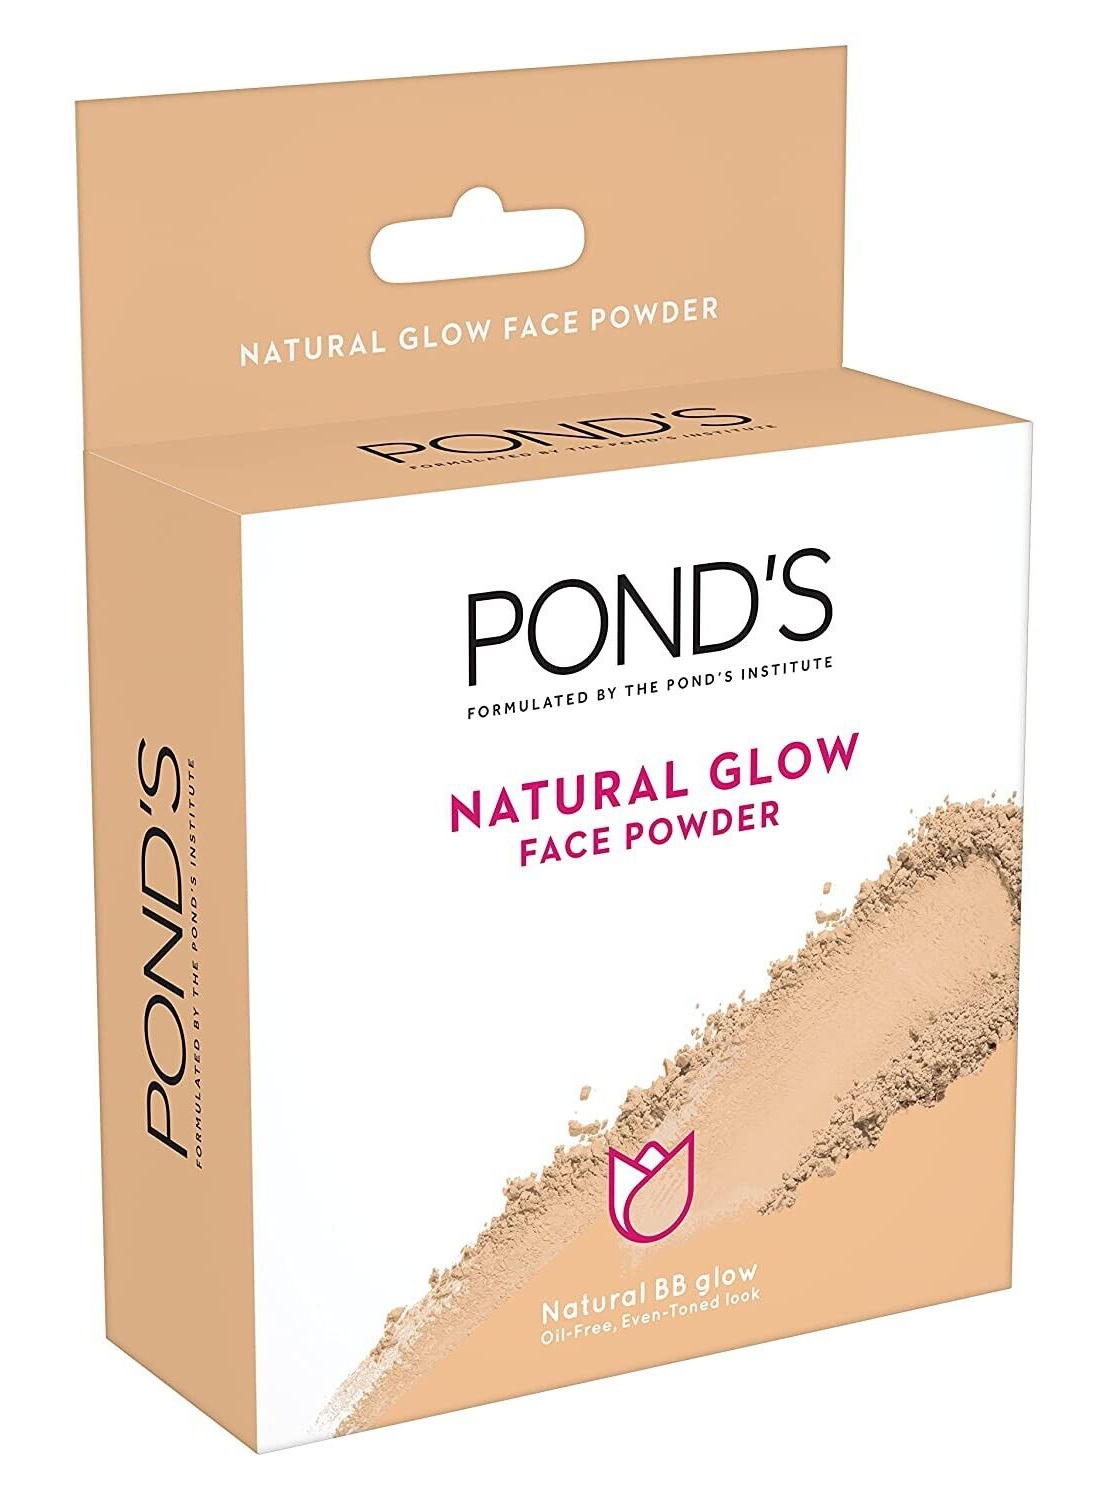 Pond's Natural Glow Face Powder